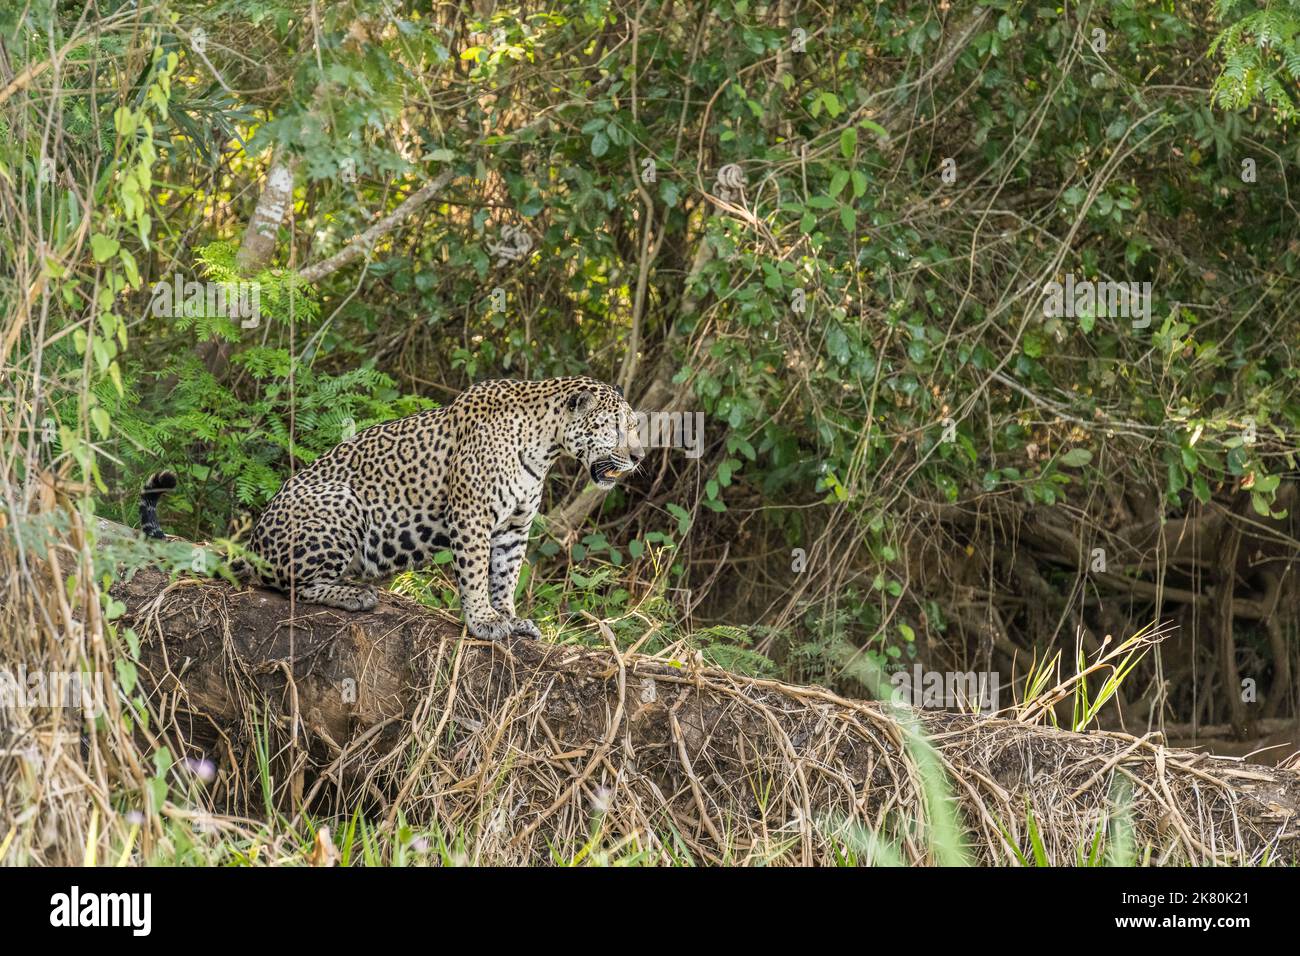 jaguar sitting on haunches in the Pantanal Jungle Stock Photo